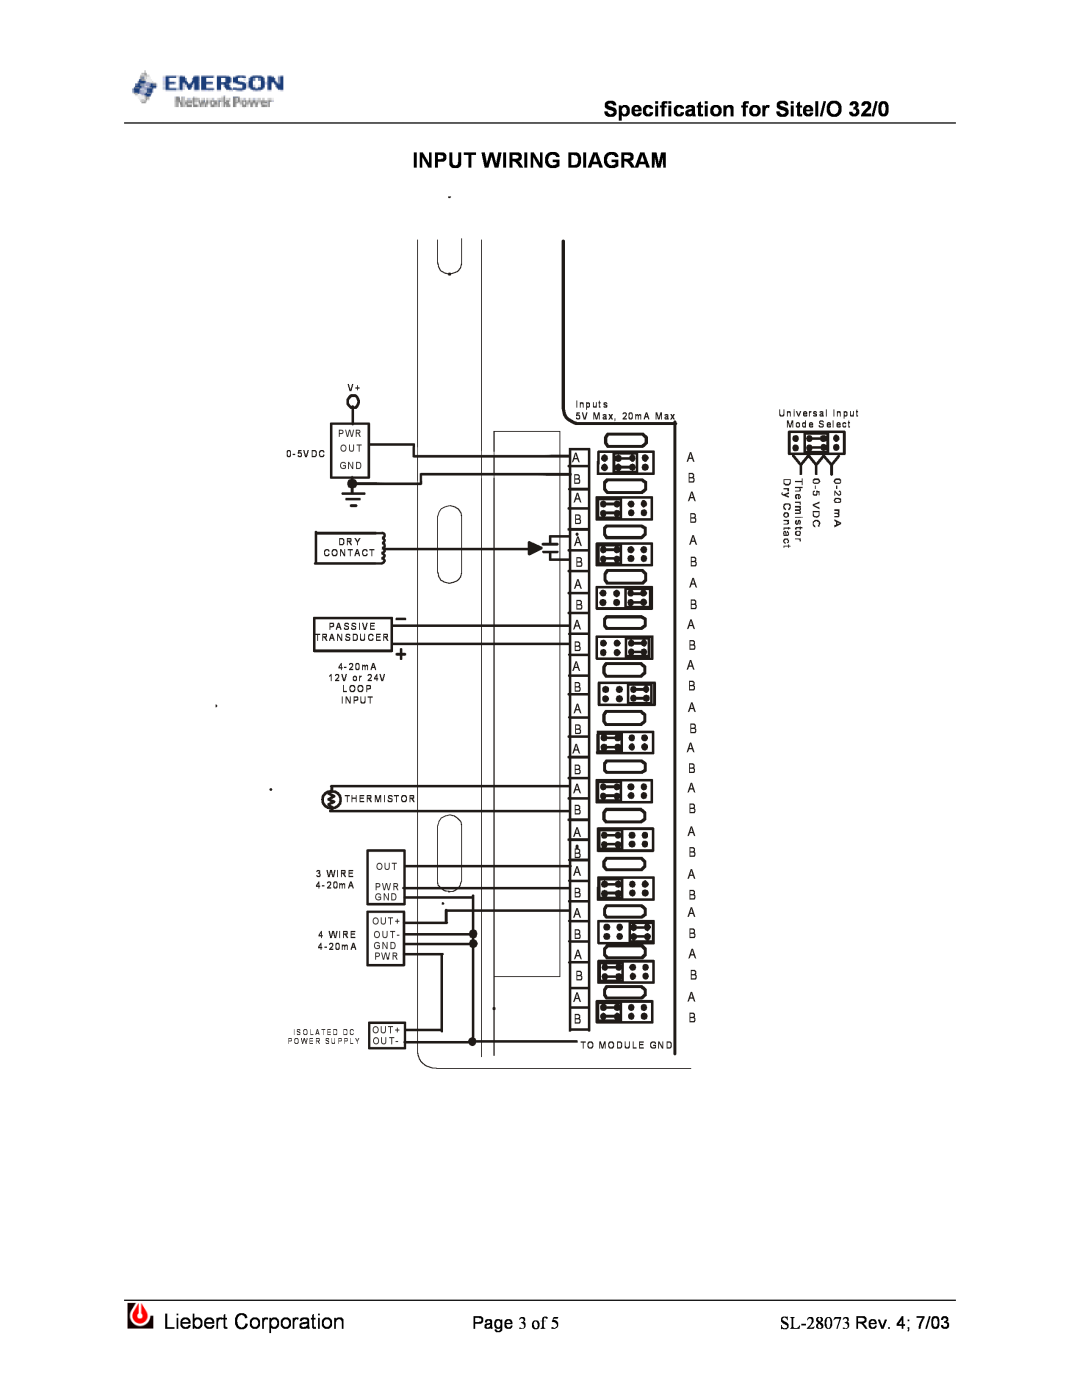 Emerson dimensions Specification for SiteI/O 32/0 INPUT WIRING DIAGRAM, Page 3 of, Liebert Corporation 